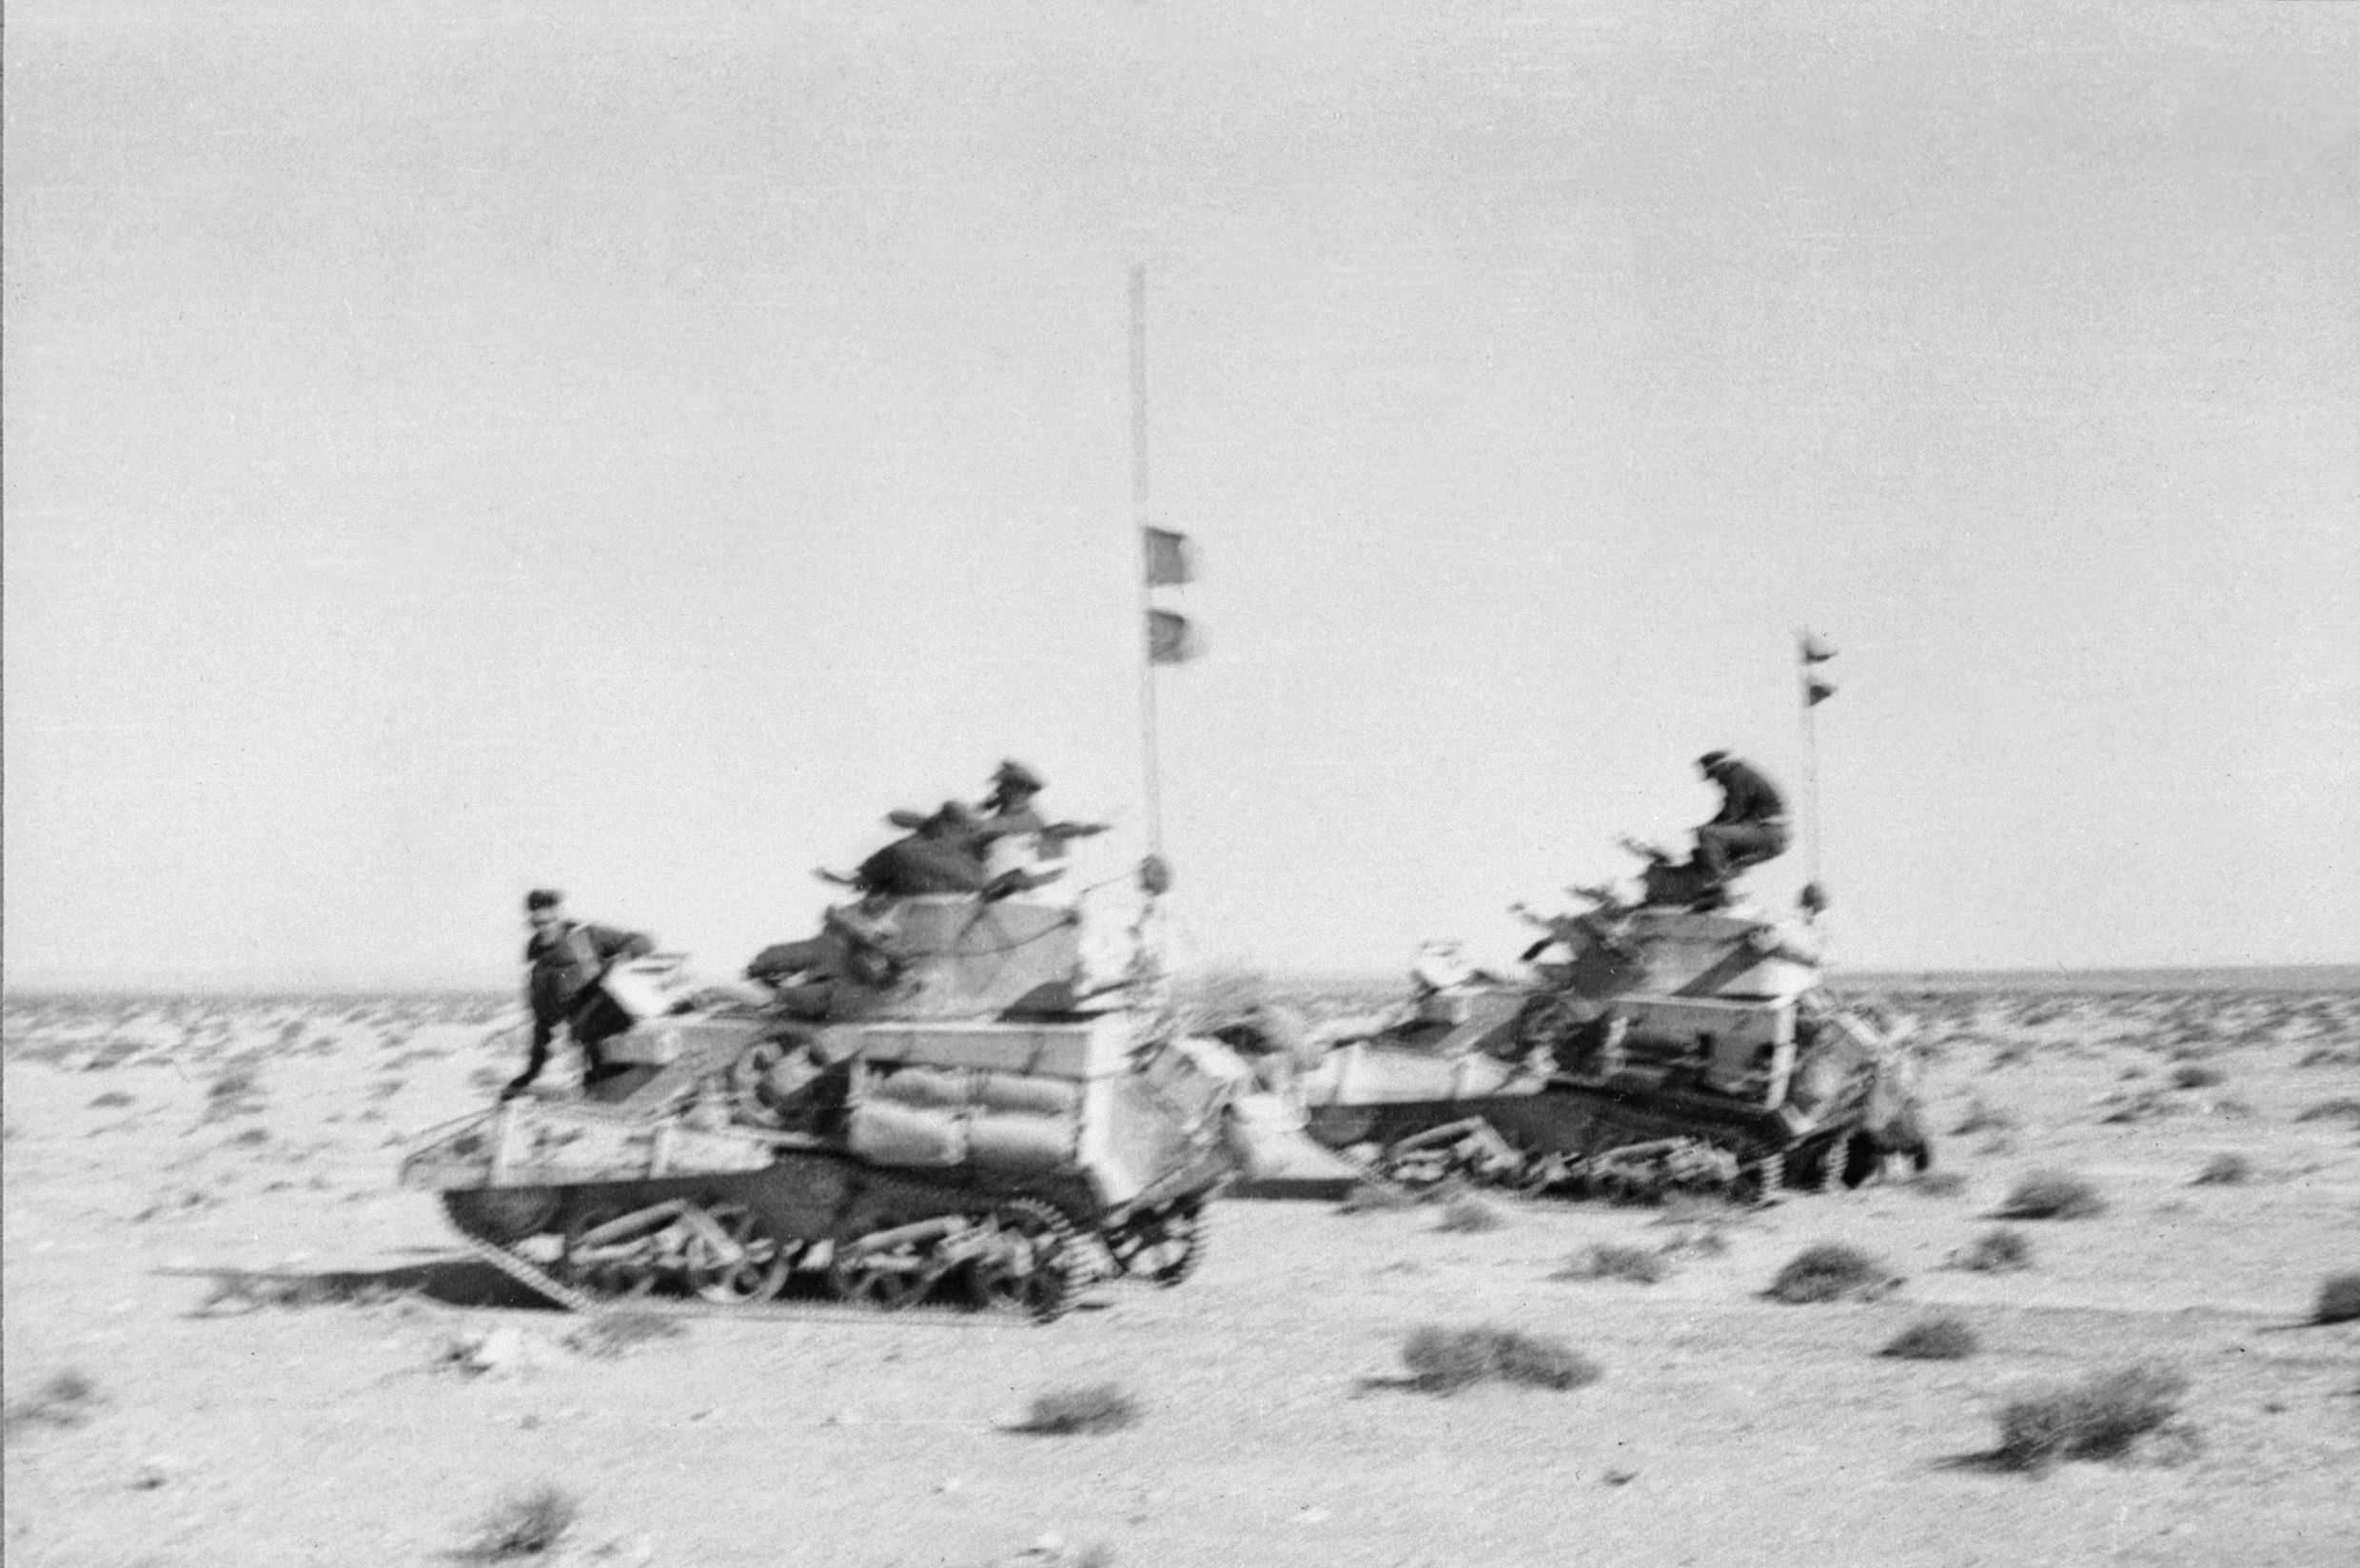 British light tanks of the 3rd Hussars speed across the desert en route to Buq Buq during Operation Compass in December 1940.